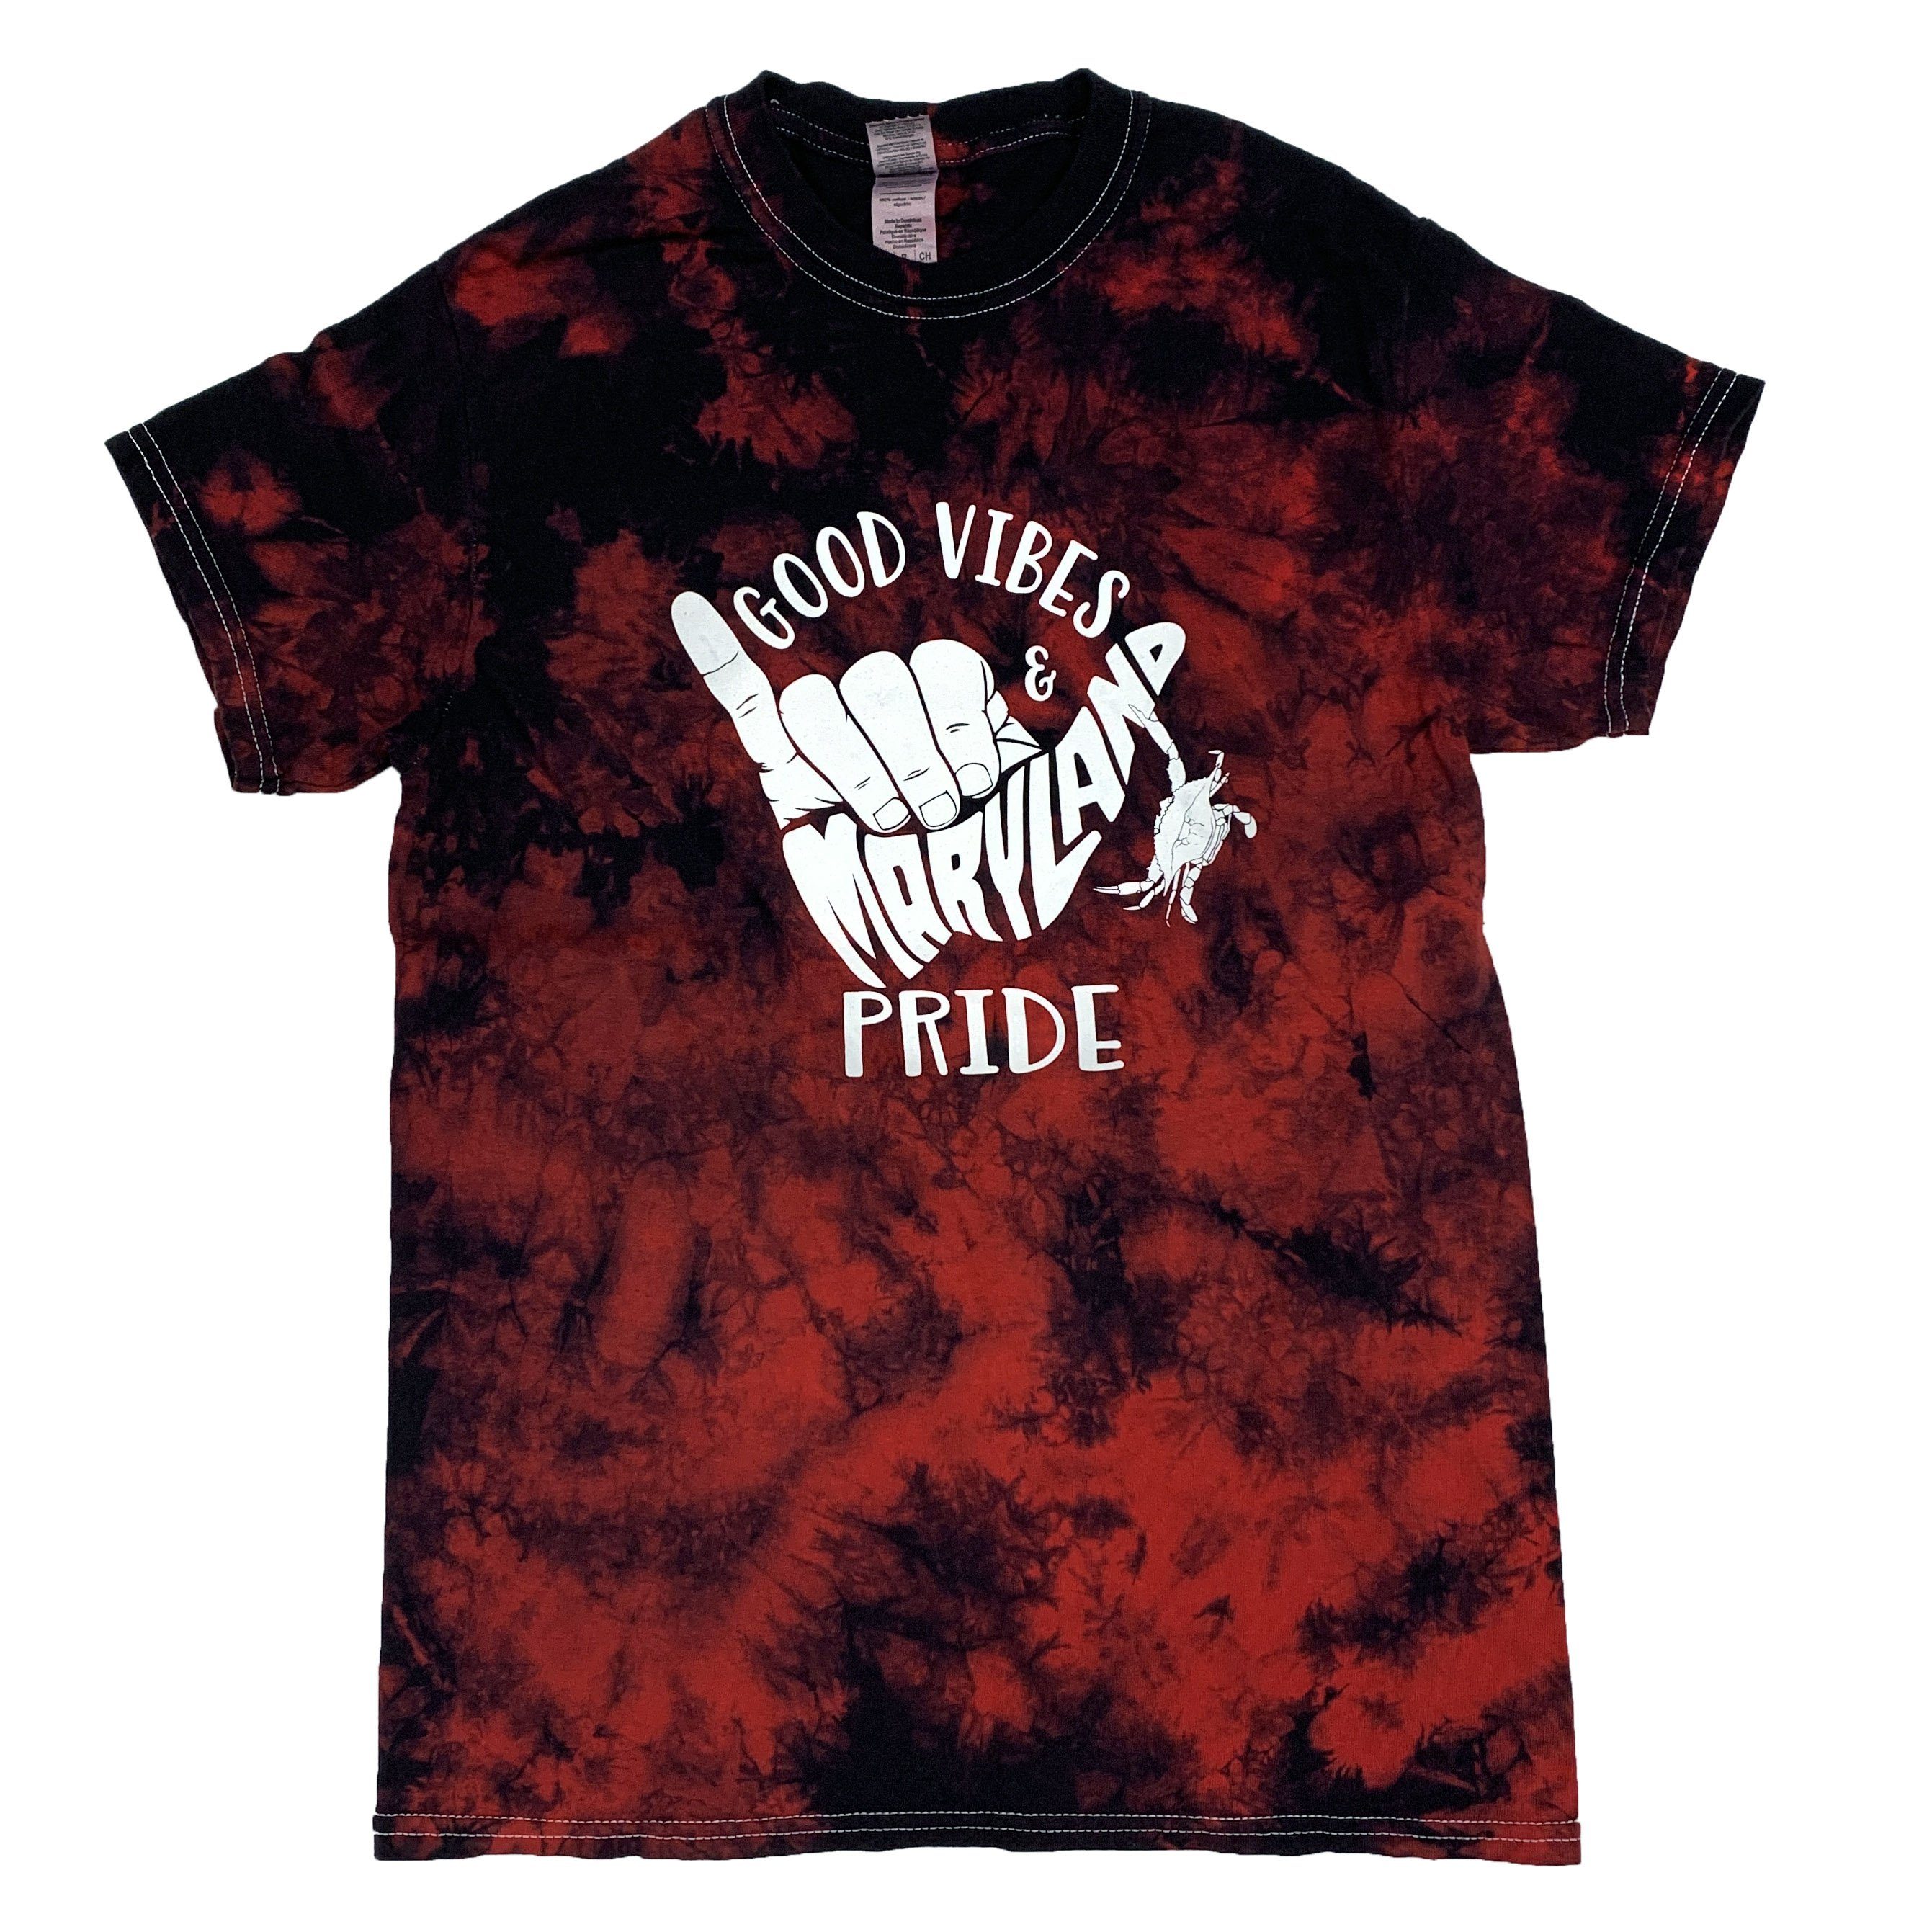 Good Vibes & Maryland Pride (Red & Black Tie Dye) / Shirt - Route One Apparel